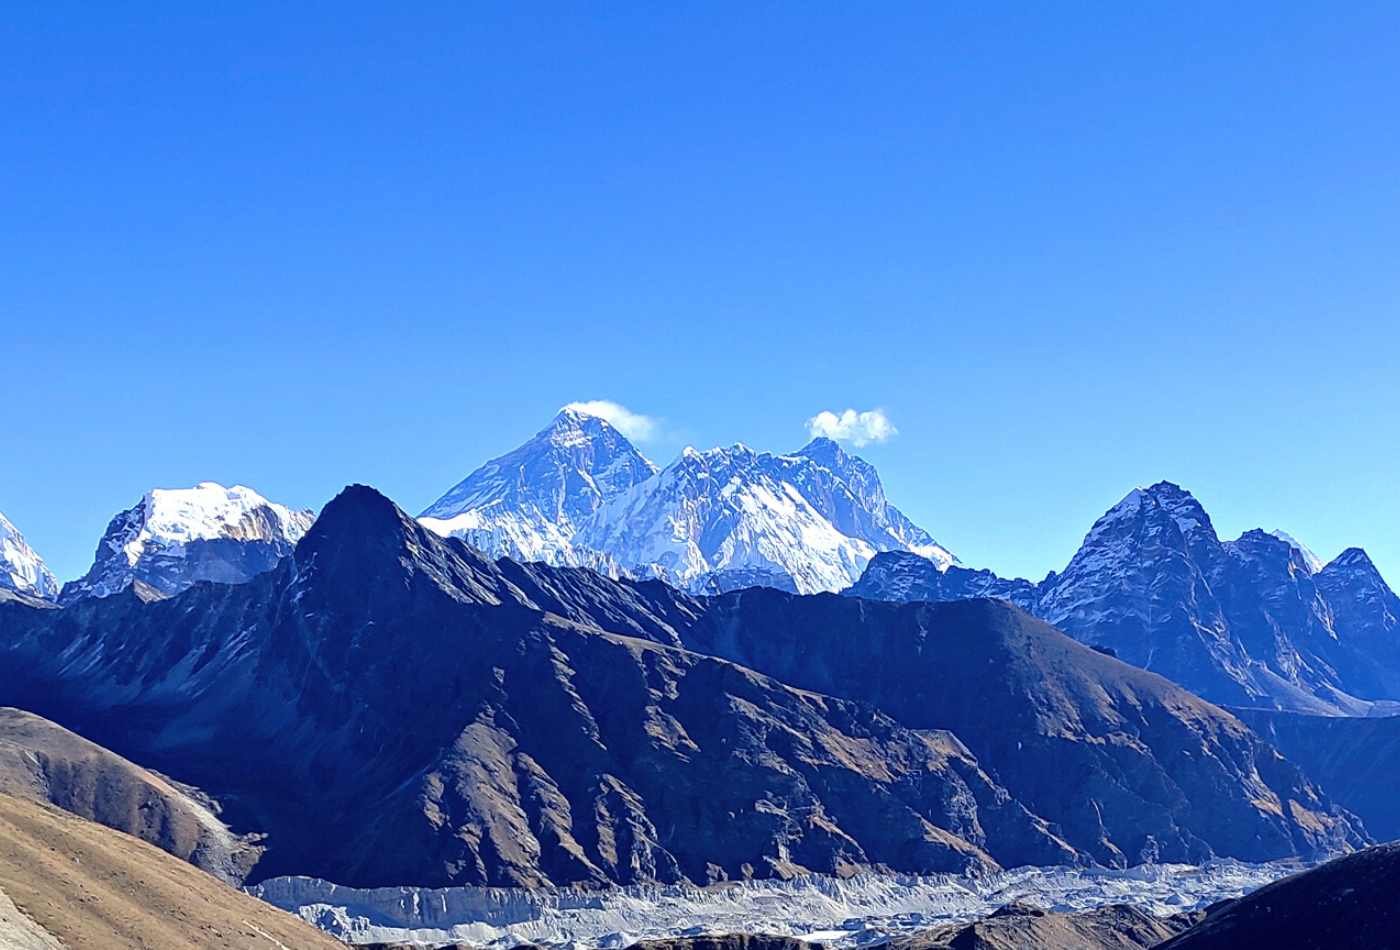 Mountain range view from Renjo-la pass in Khumbu Region, with Mt. Everest, Nuptse, and Lhotse visible in the distance on a clear day.